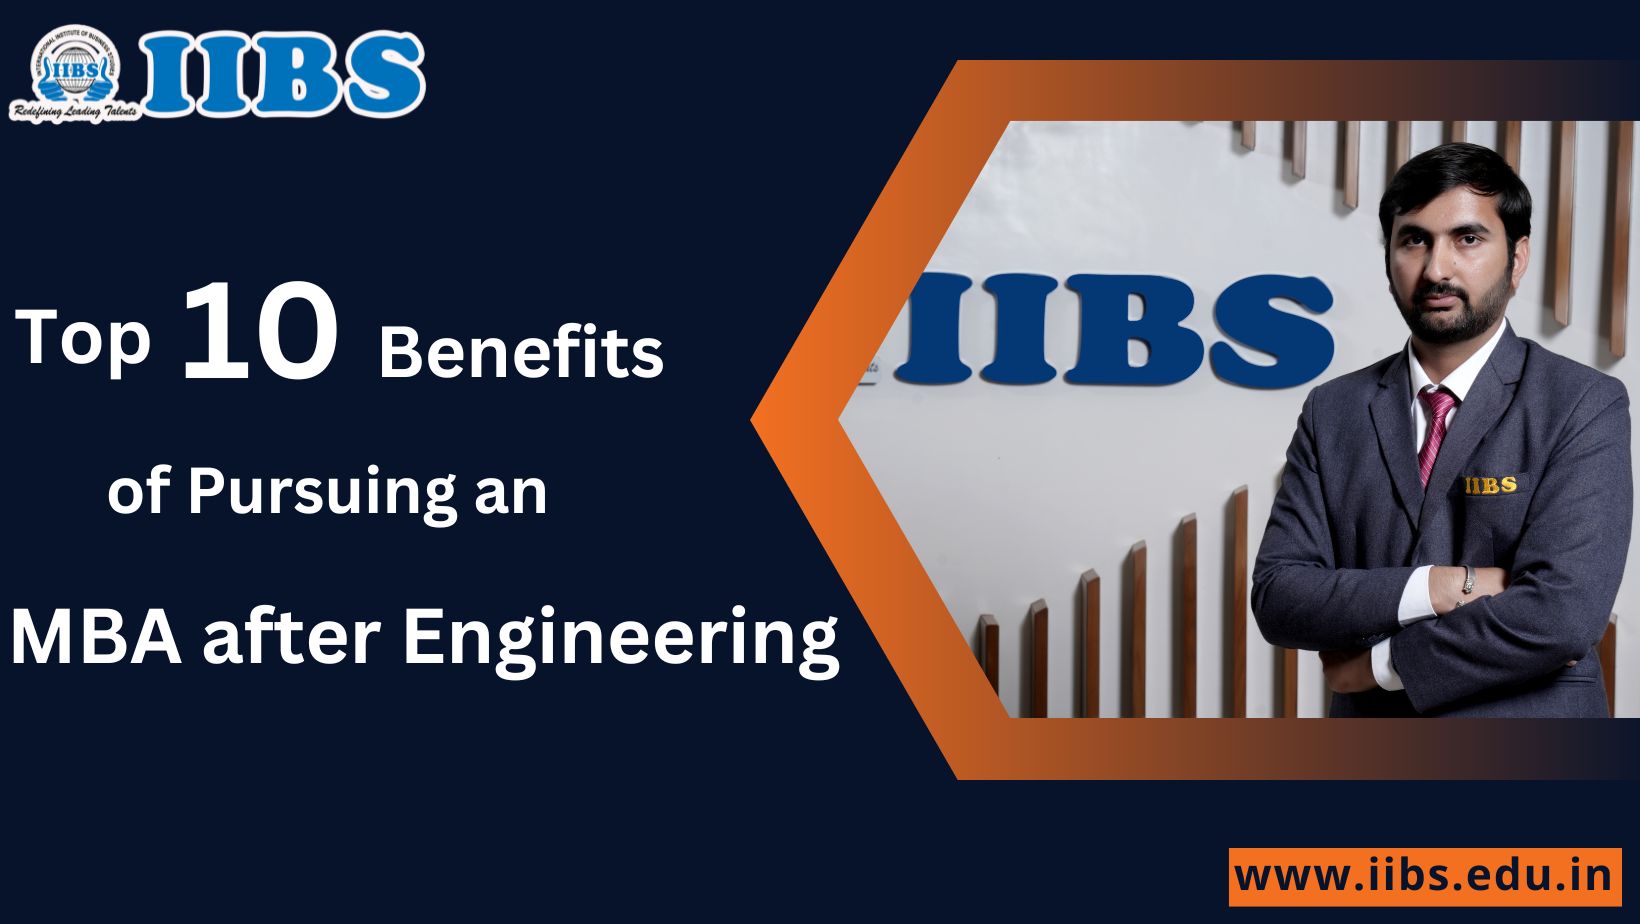 Top 10 Benefits of Pursuing an MBA after Engineering